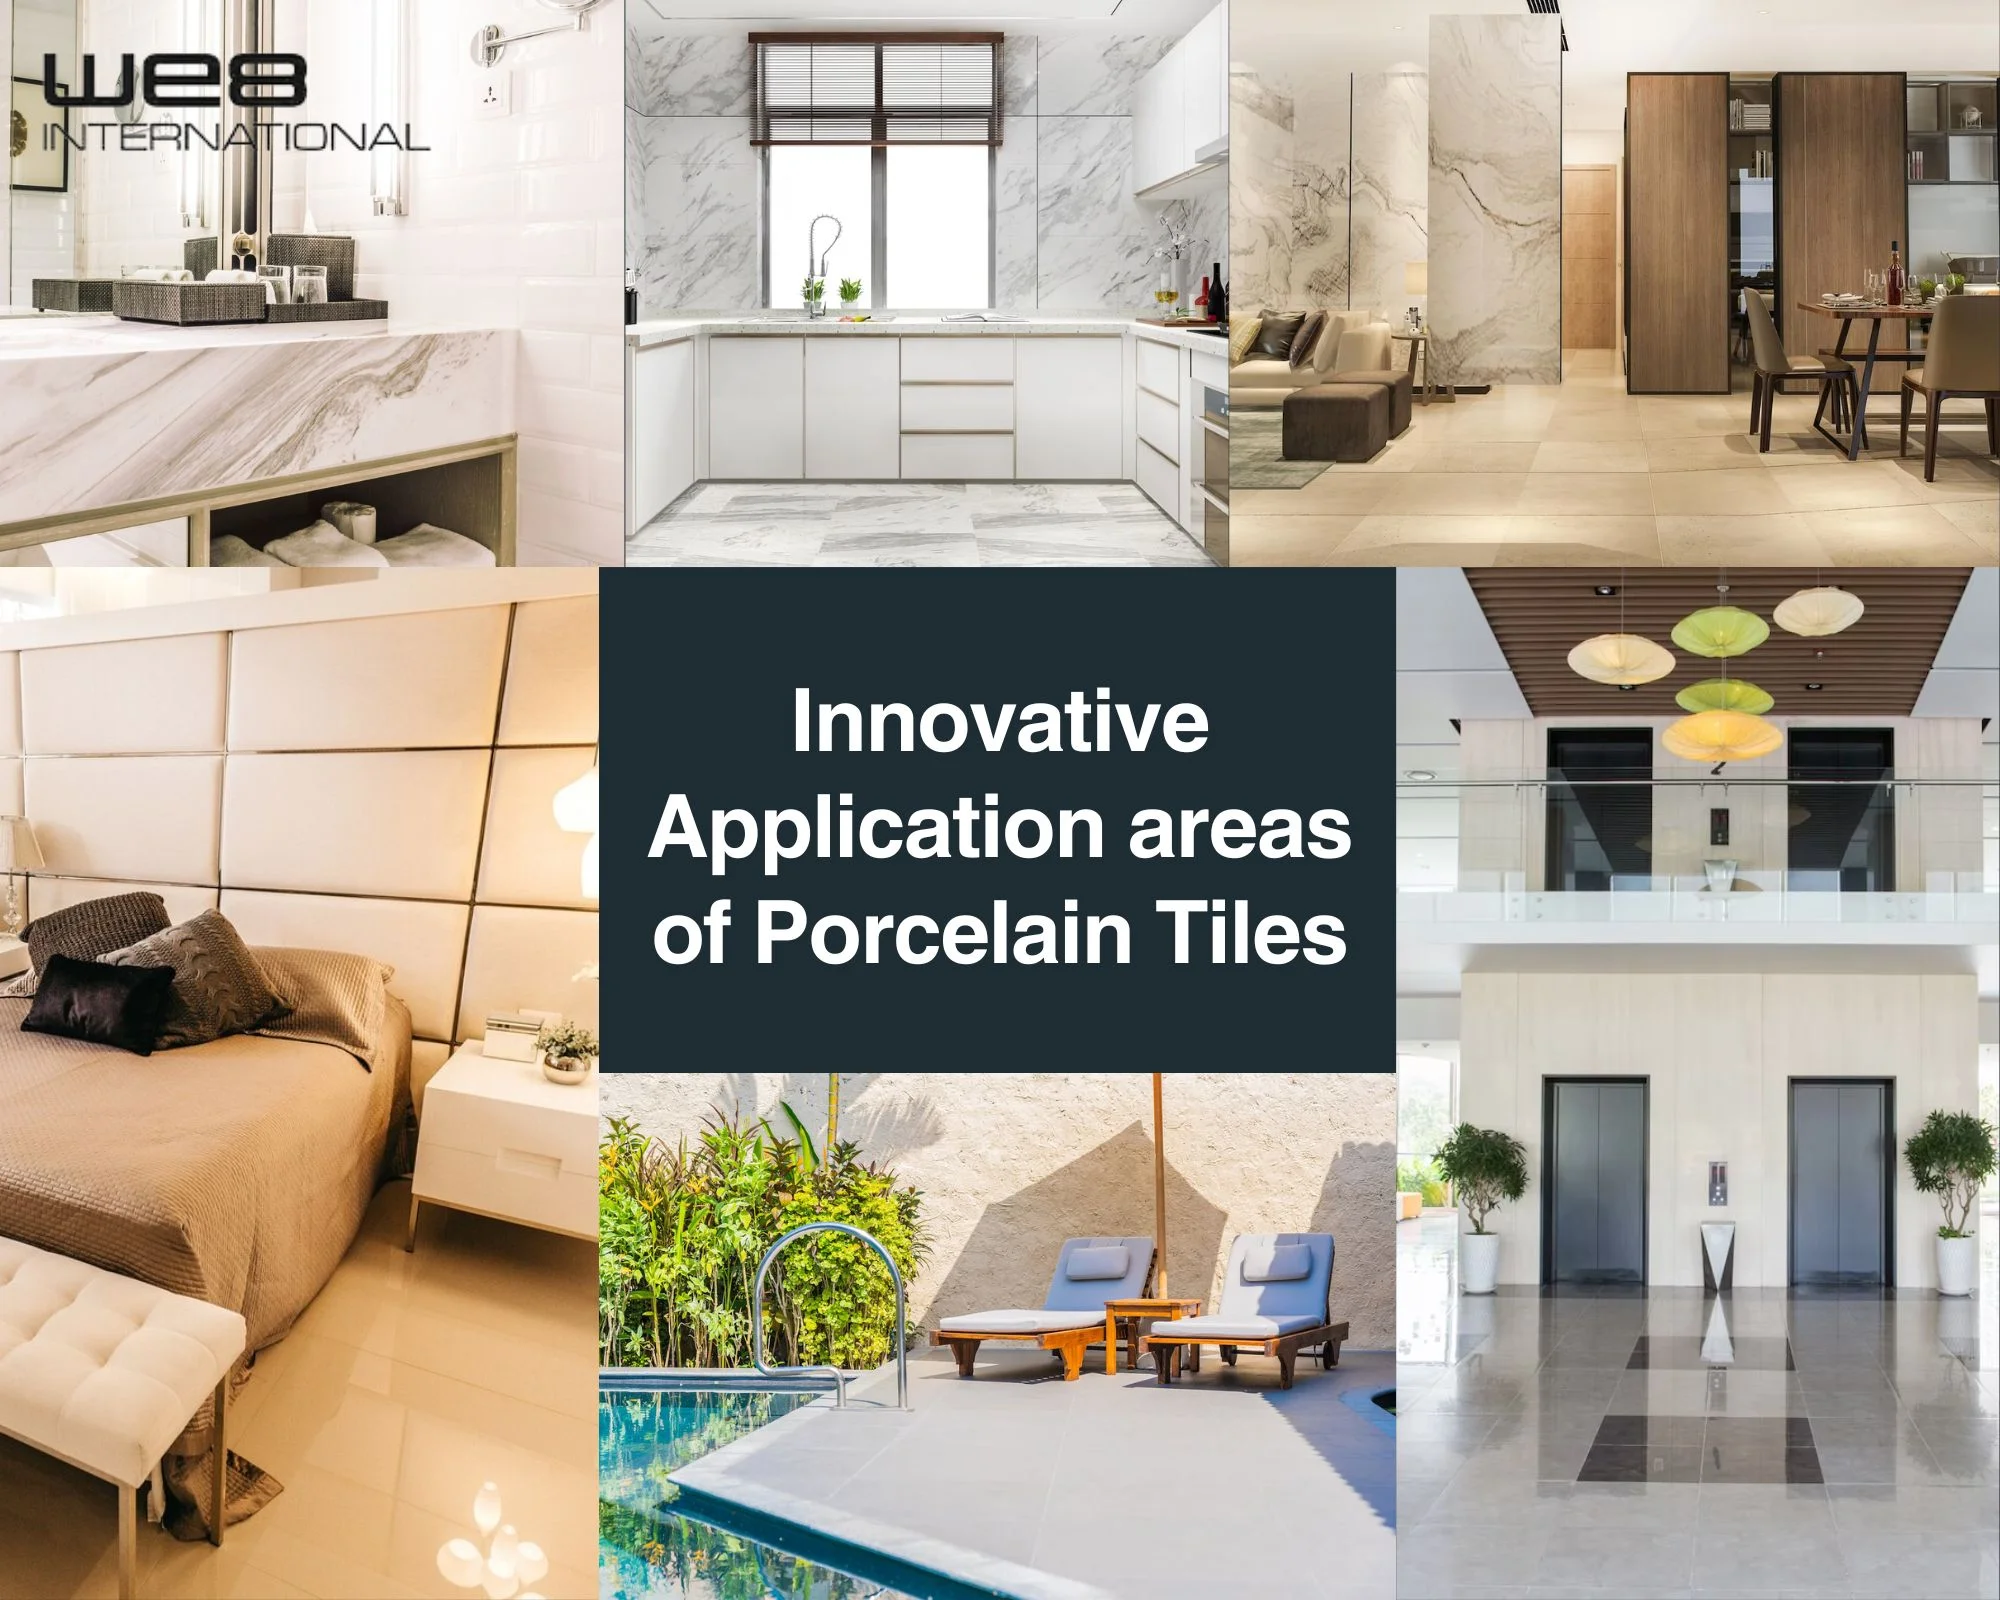 Innovative Application areas of Porcelain Tiles